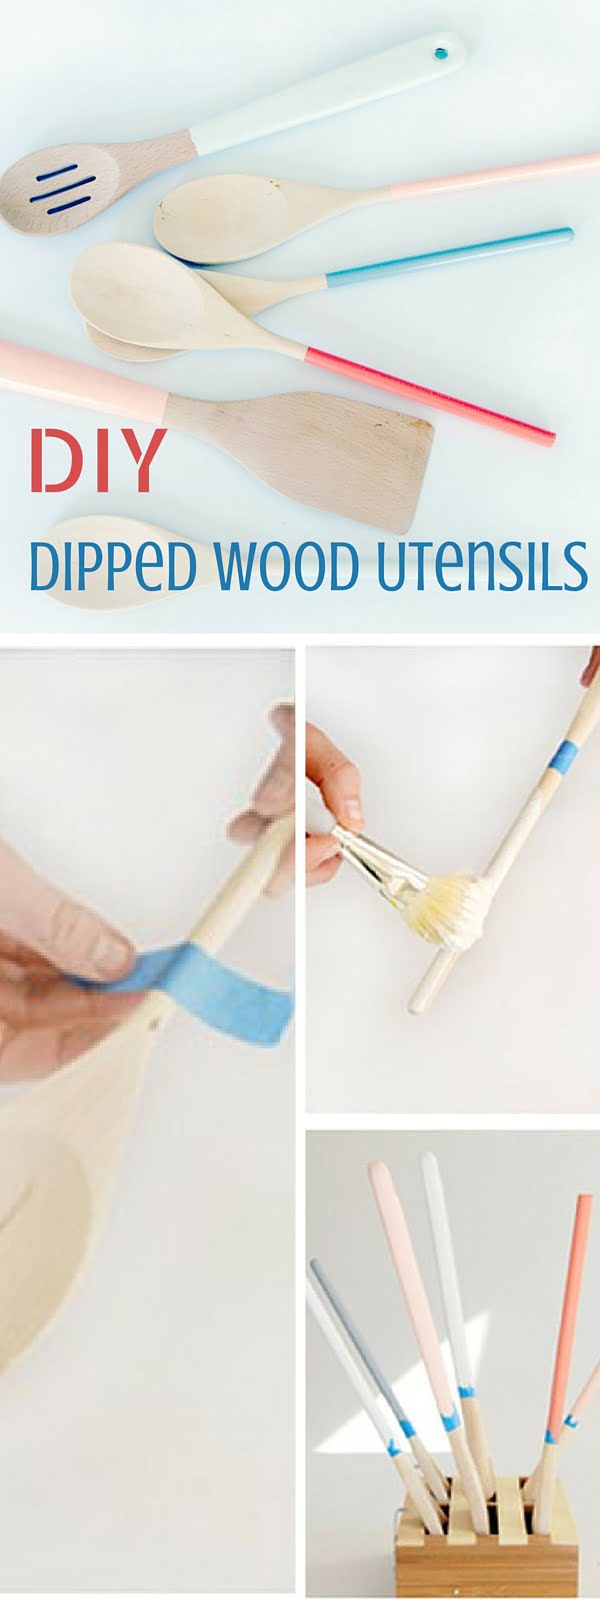 Check out the tutorial:   Dipped Wood Utensils Knockoff 